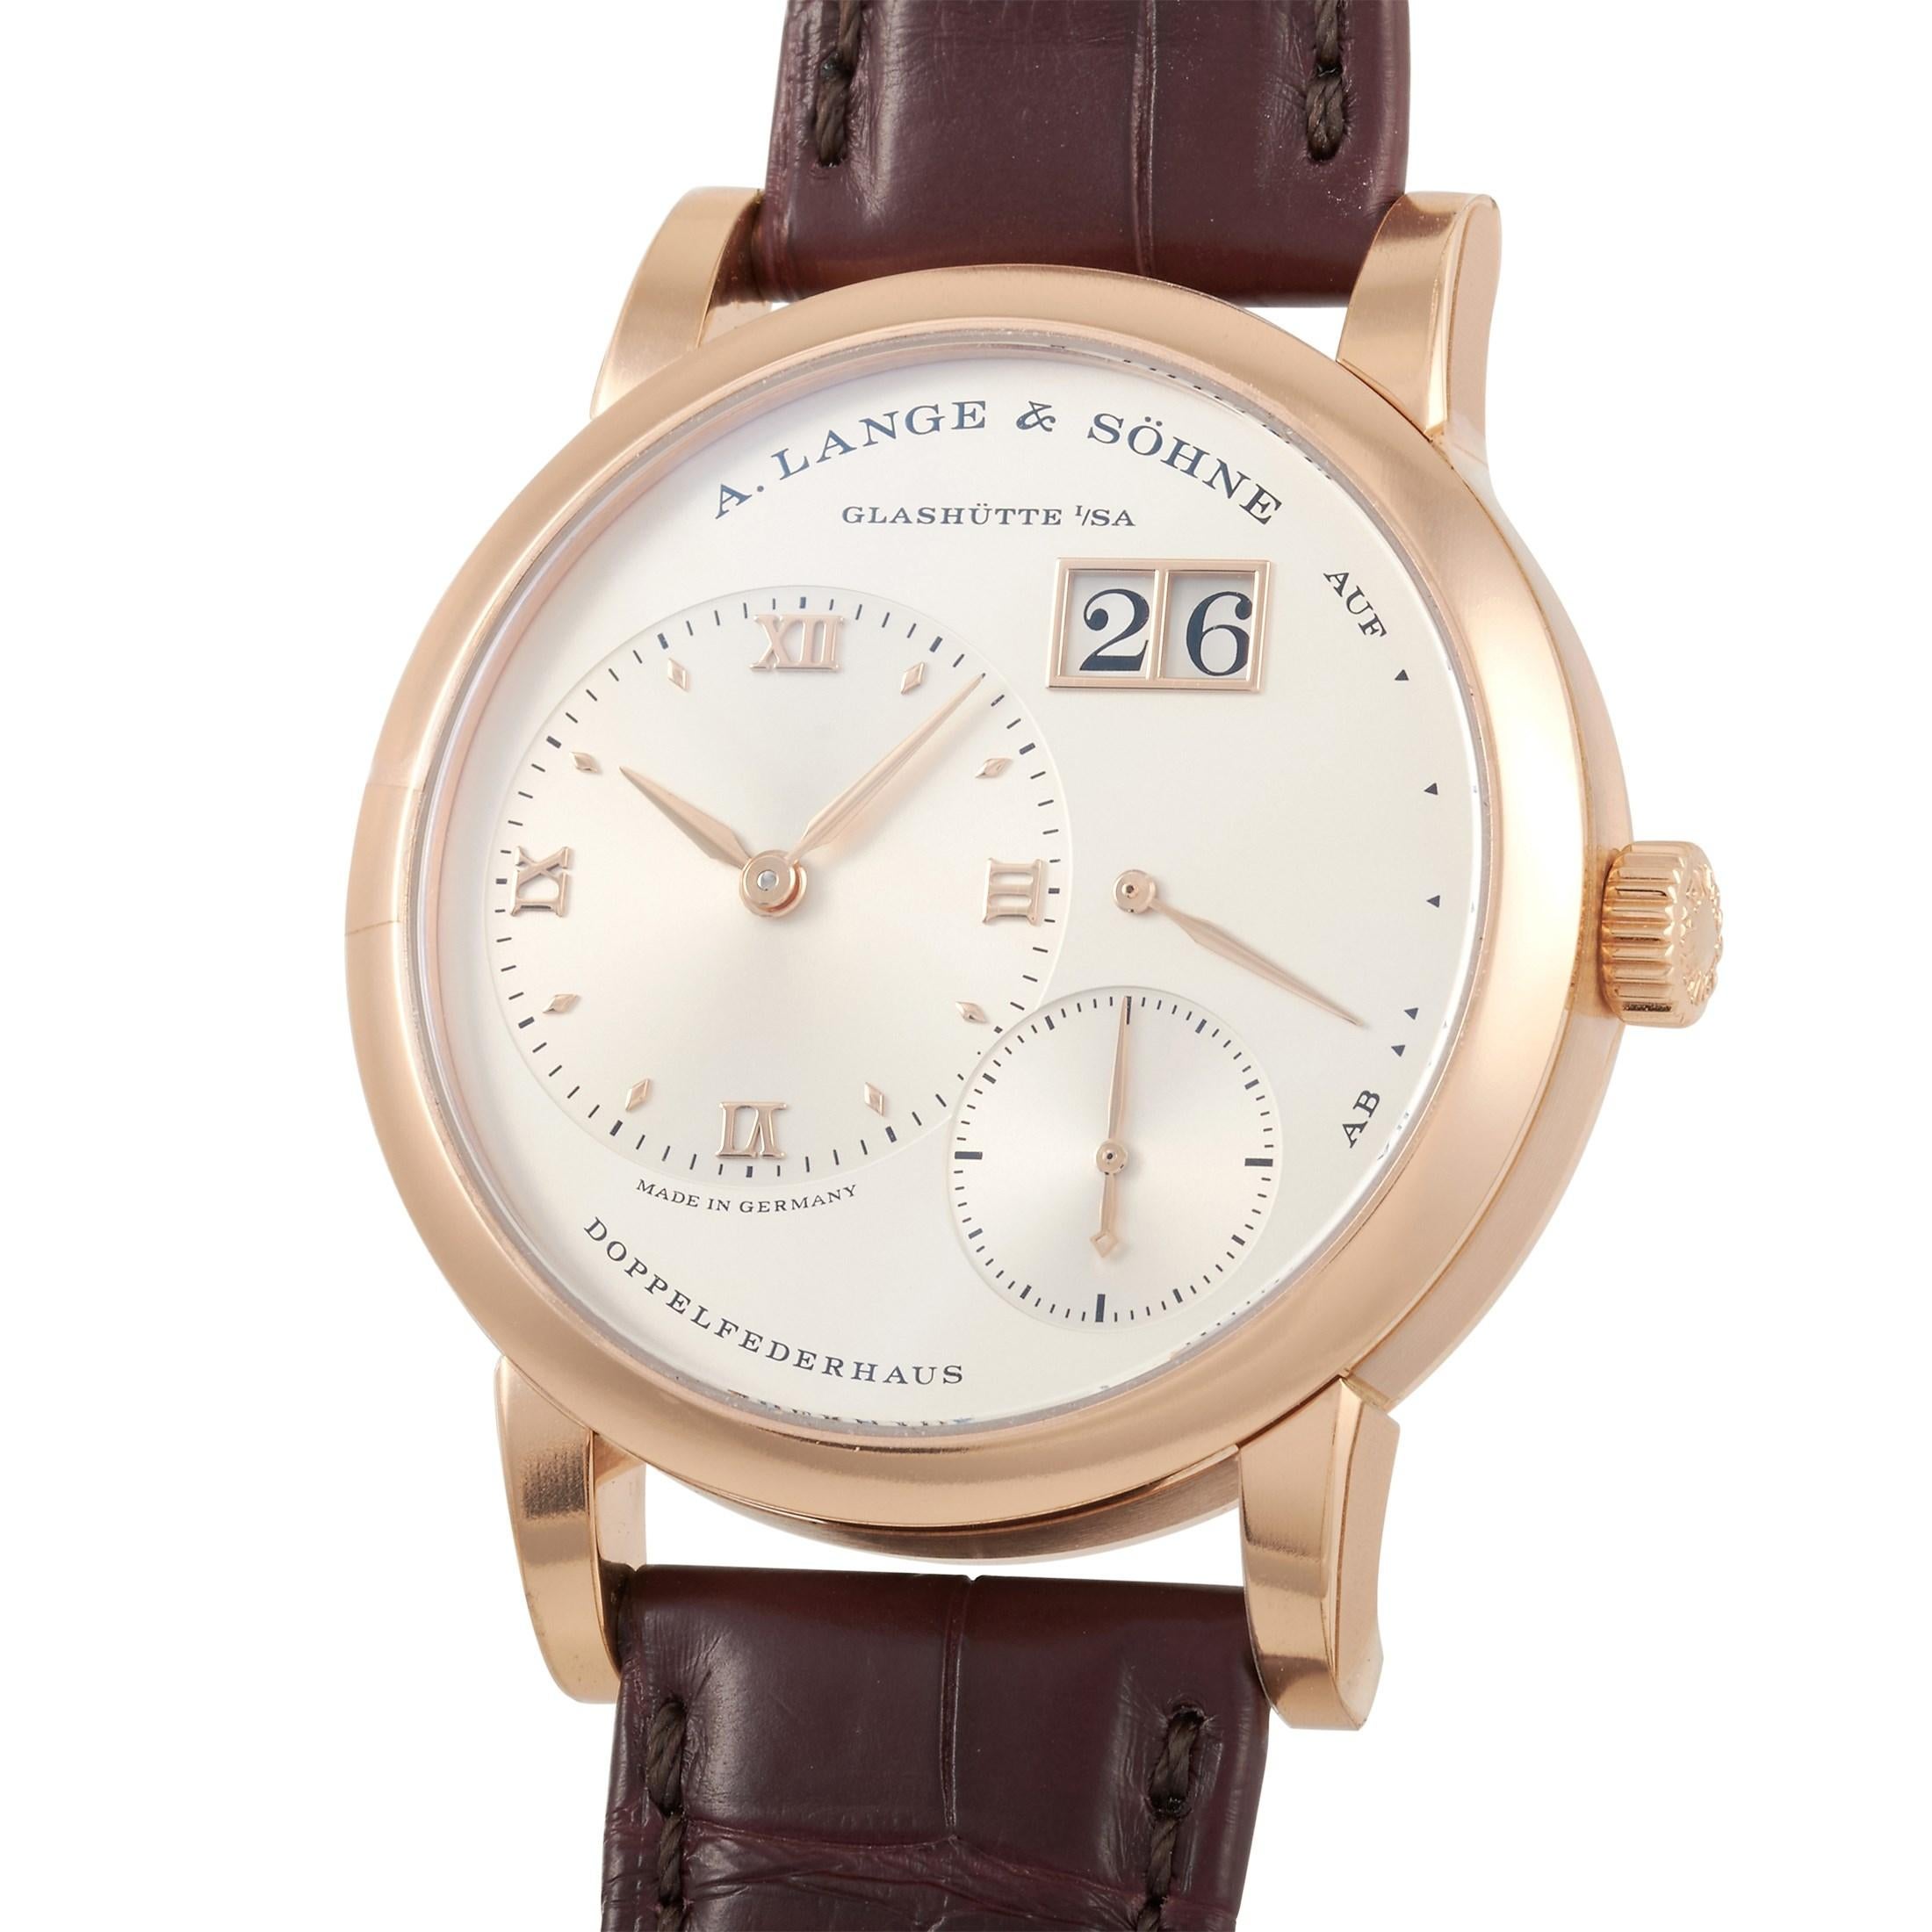 This A. Lange & Sohne Lange 1 38.5 mm 18K Rose Gold Watch, reference number 191.032, comes with an 18K rose gold case that measures 38.5 mm in diameter. The case is presented on a deep brown Alligator leather strap with tang closure. The transparent